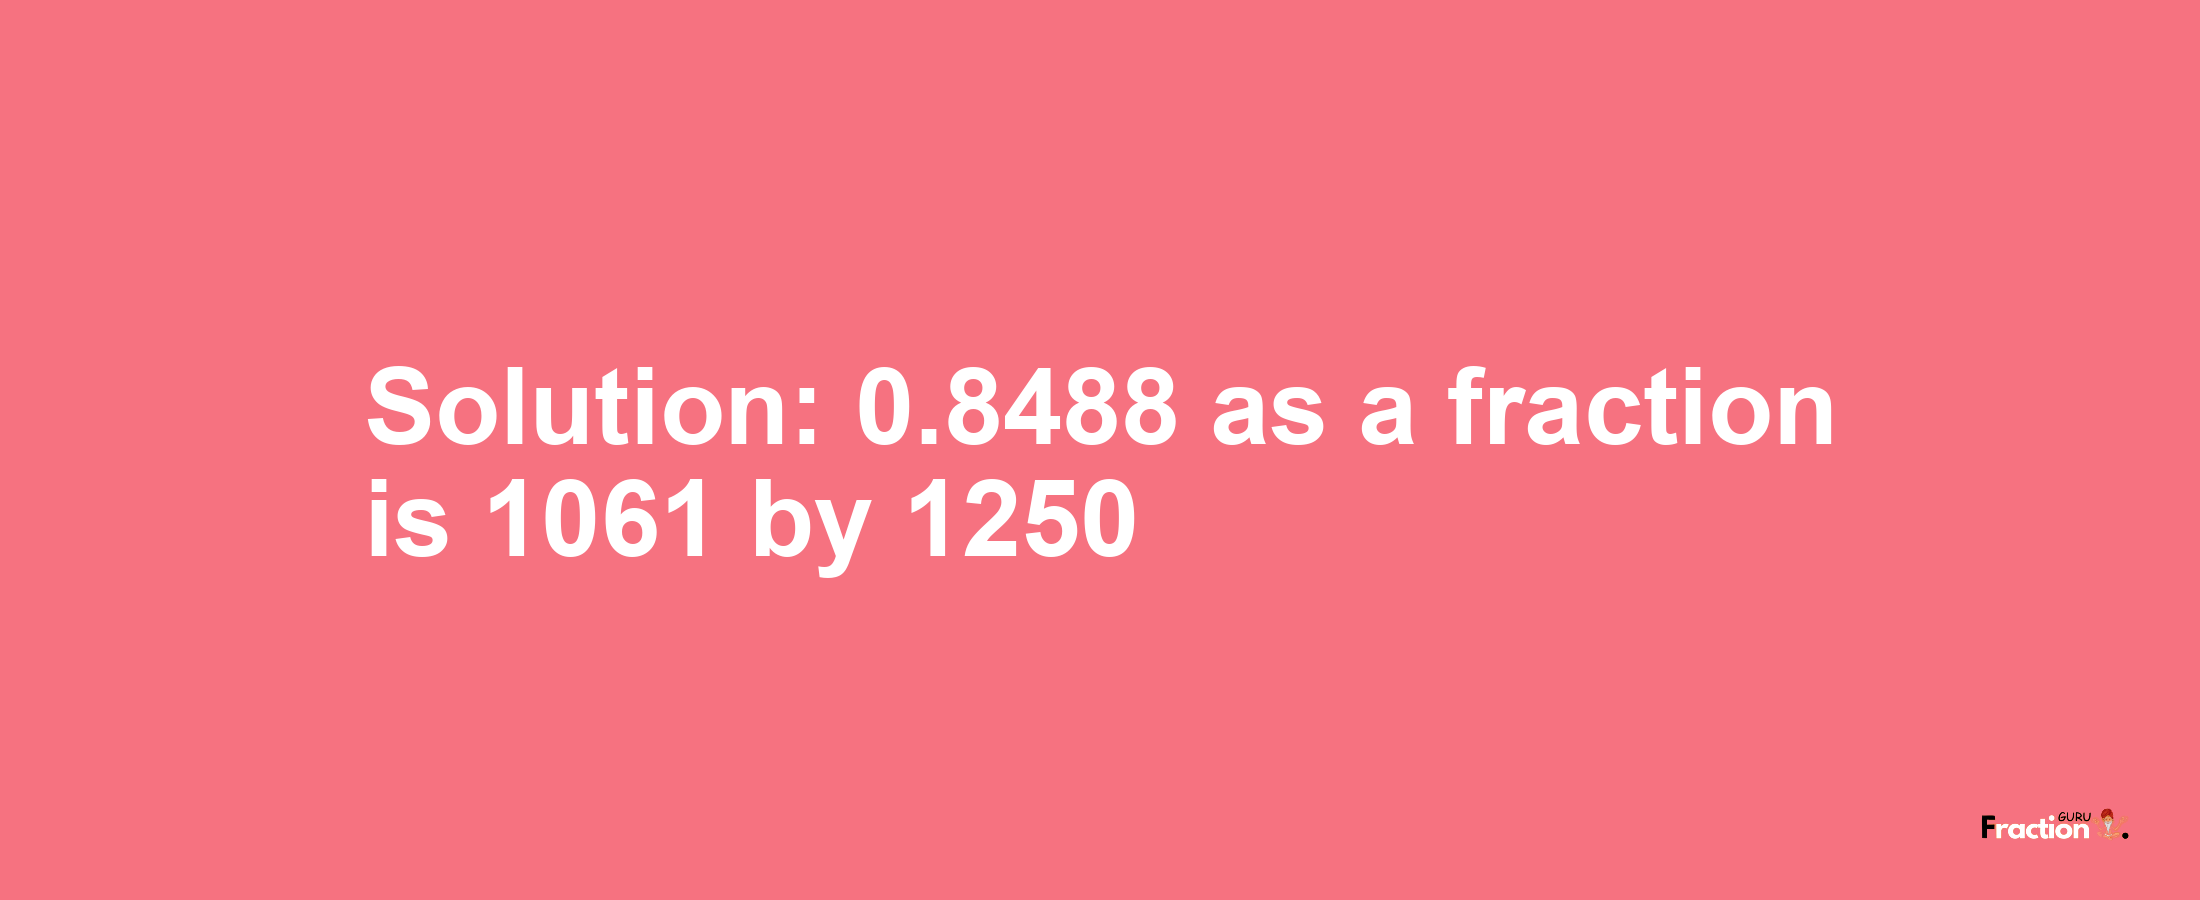 Solution:0.8488 as a fraction is 1061/1250